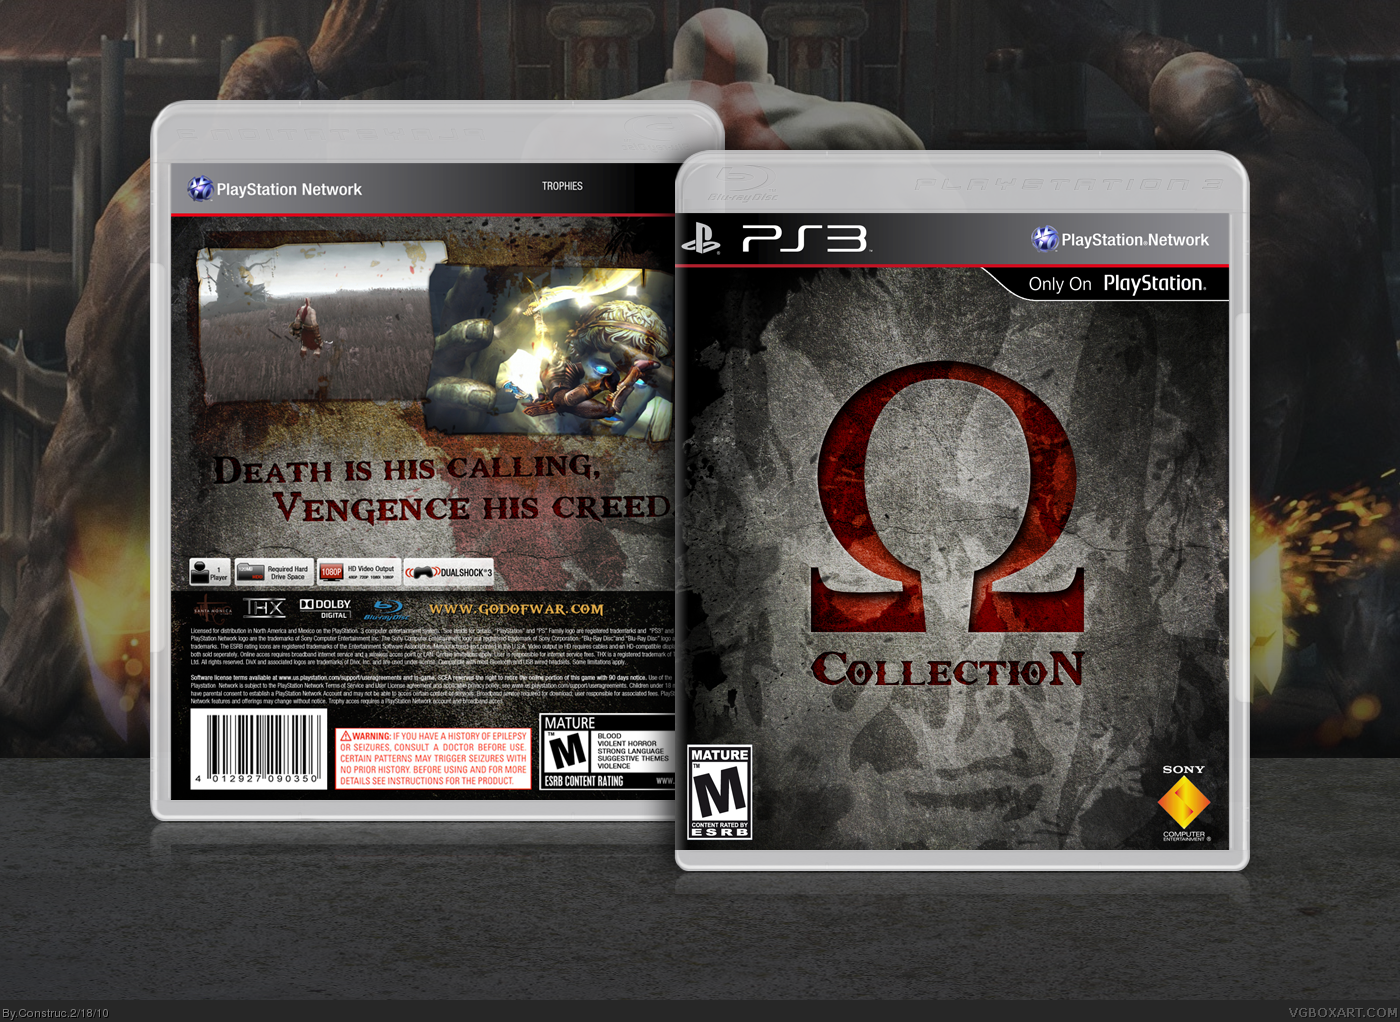 God of War Collection box cover